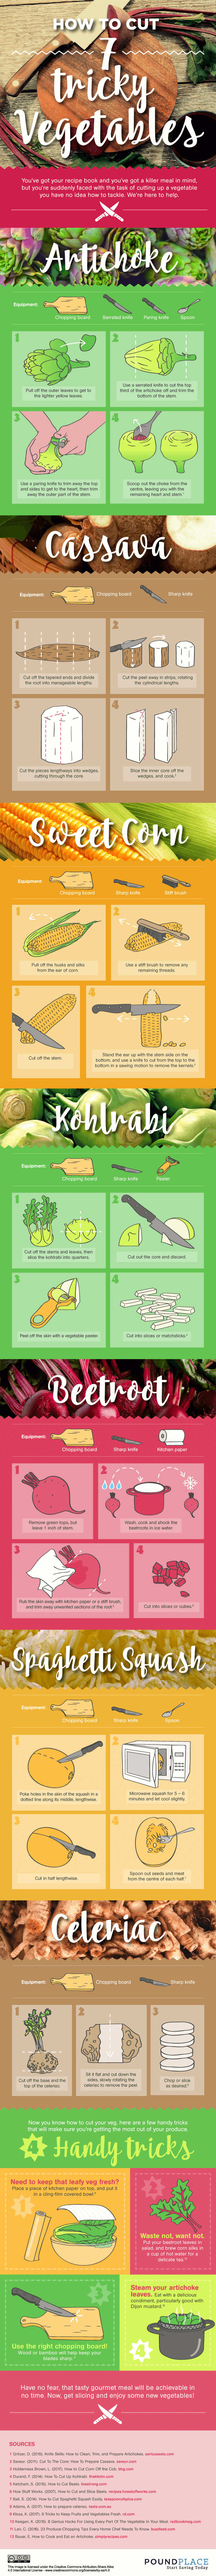 How-to-cut-7-tricky-vegetables